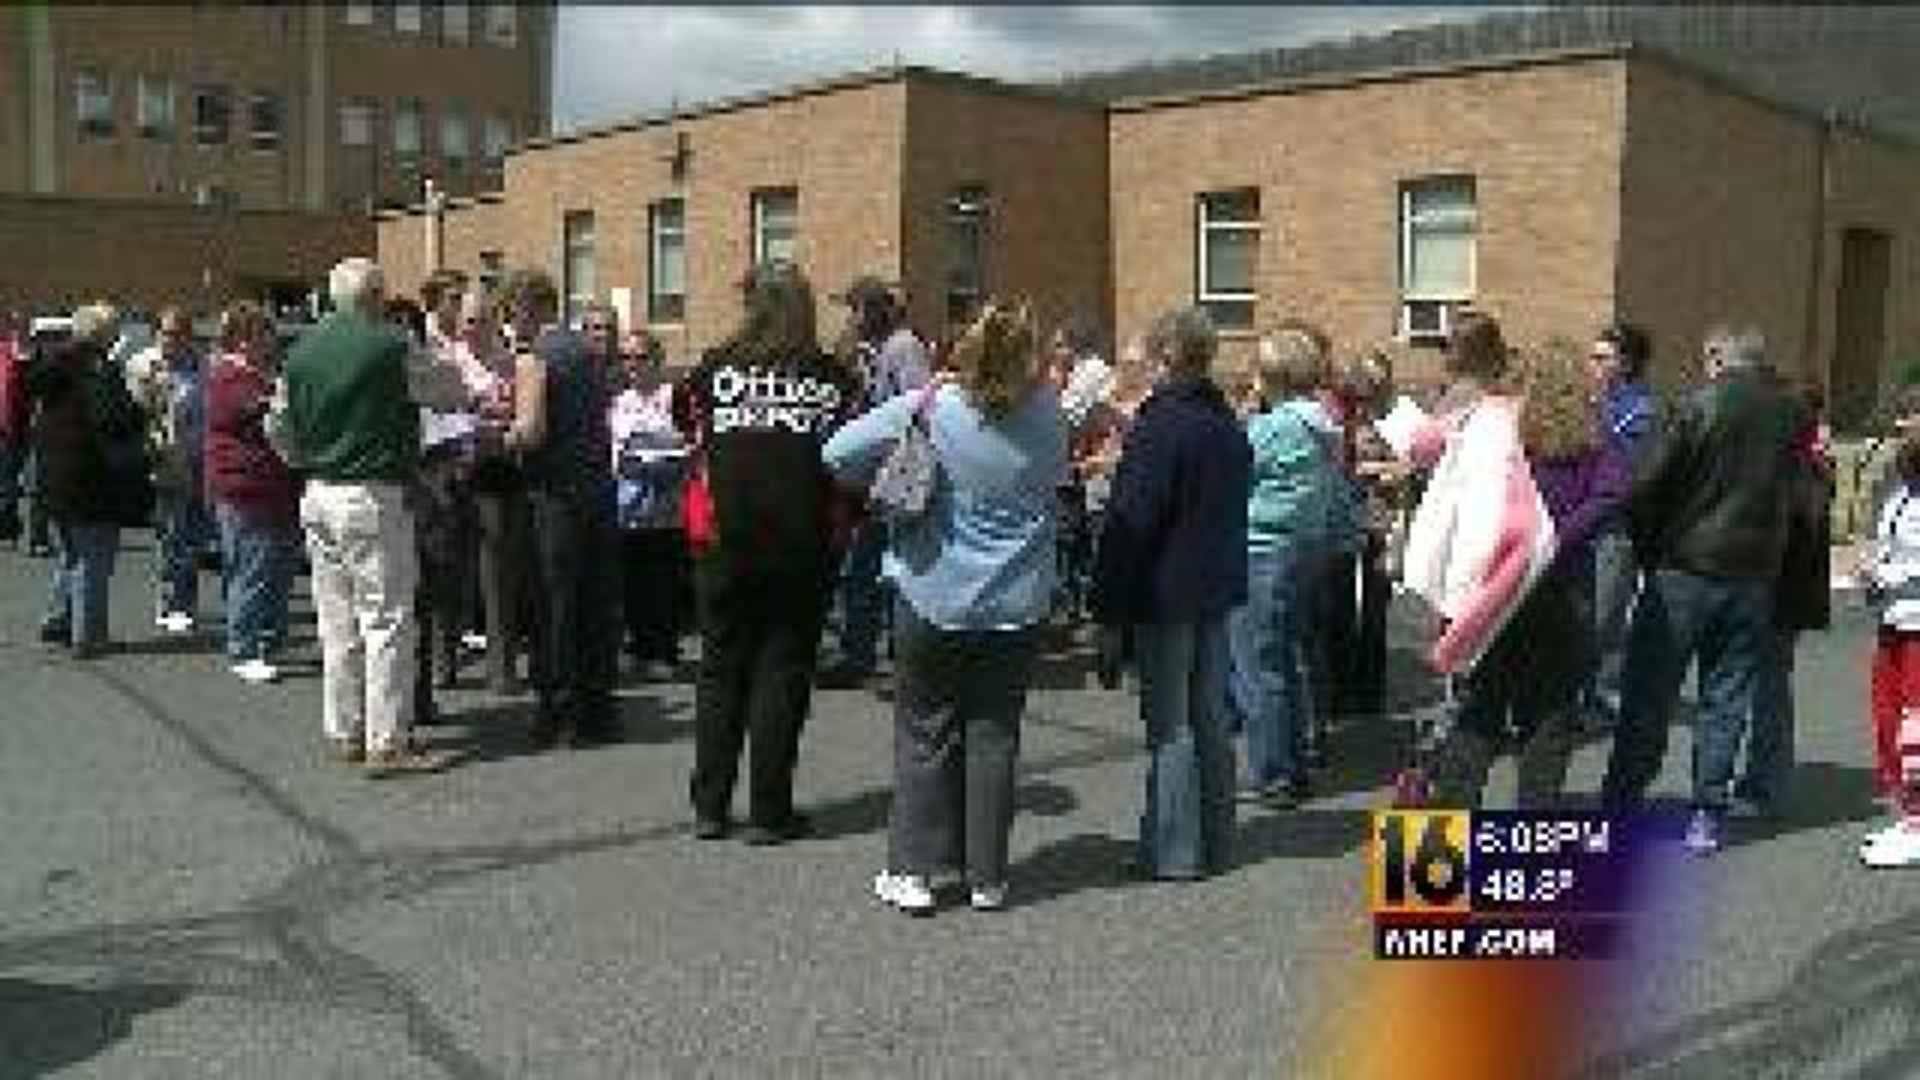 Workers React to Hospital Closure